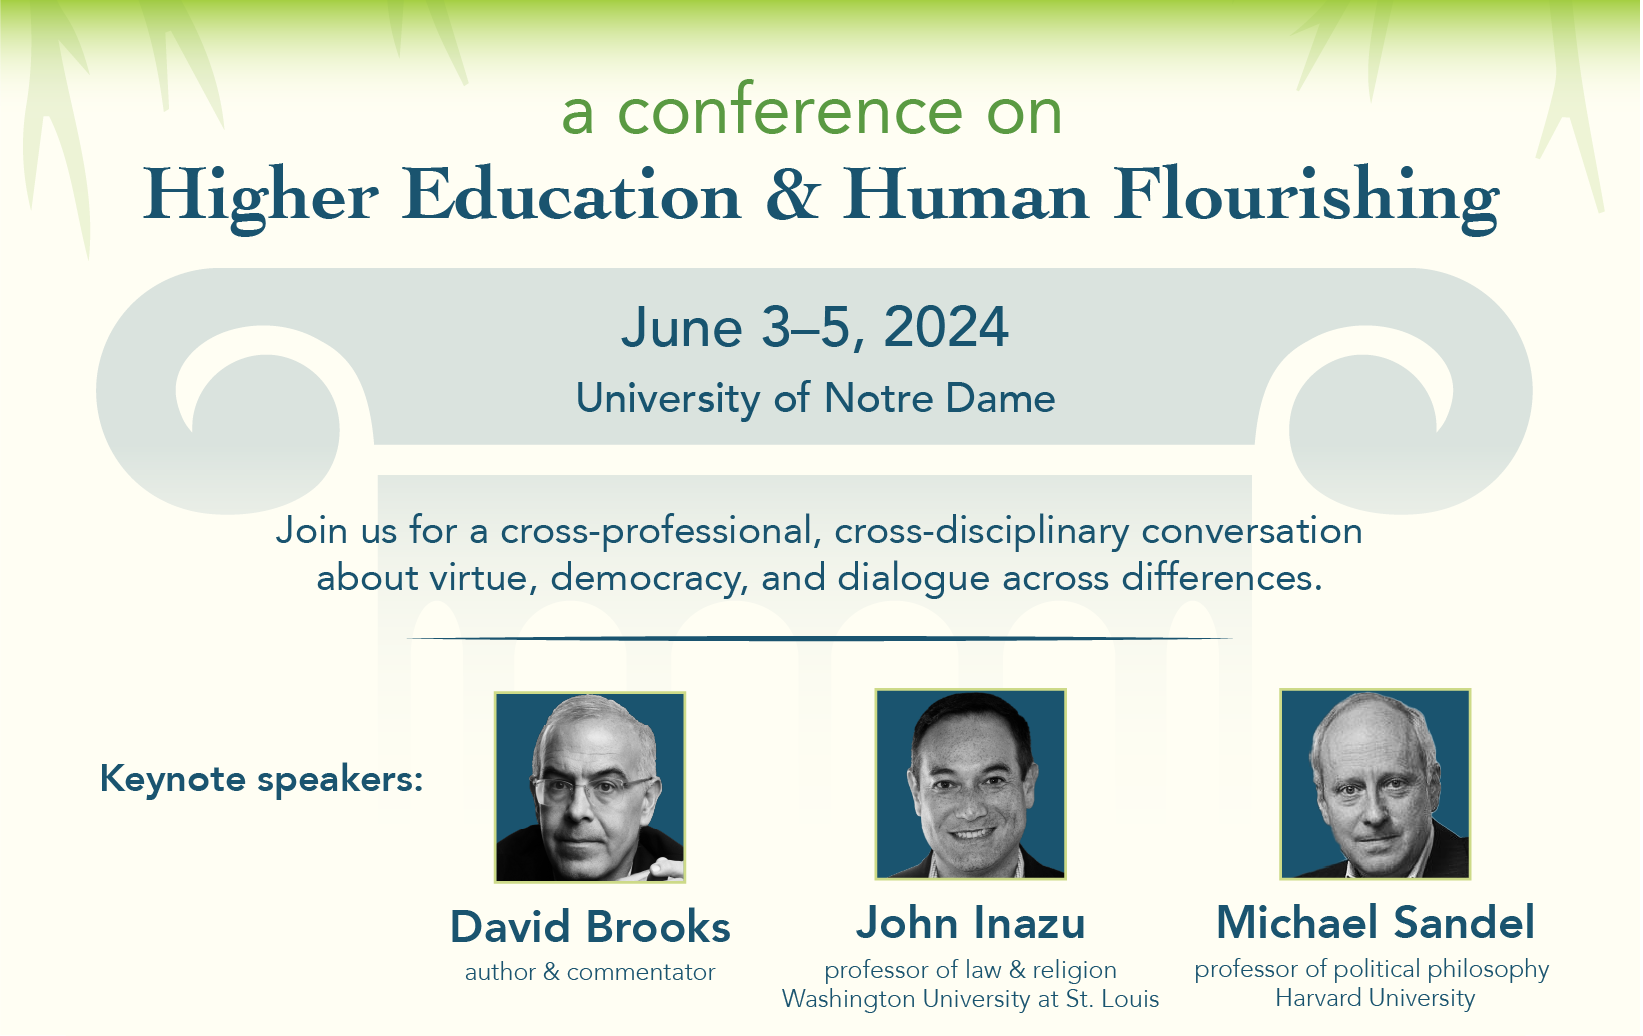 Green, yellow, and blue graphic featuring keynote speaker photos and the following text: A conference on Higher Education and Human Flourishing. June 3-5, 2024, University of Notre Dame. Join us for a cross-professional, cross-disciplinary conversation about virtue, democracy, and dialogue across differences. Keynote speakers: David Brooks, author and commentator; John Inazu, professor of law and religion, Washington University of St. Louis; Michael Sandel, professor of philosophy, Harvard University